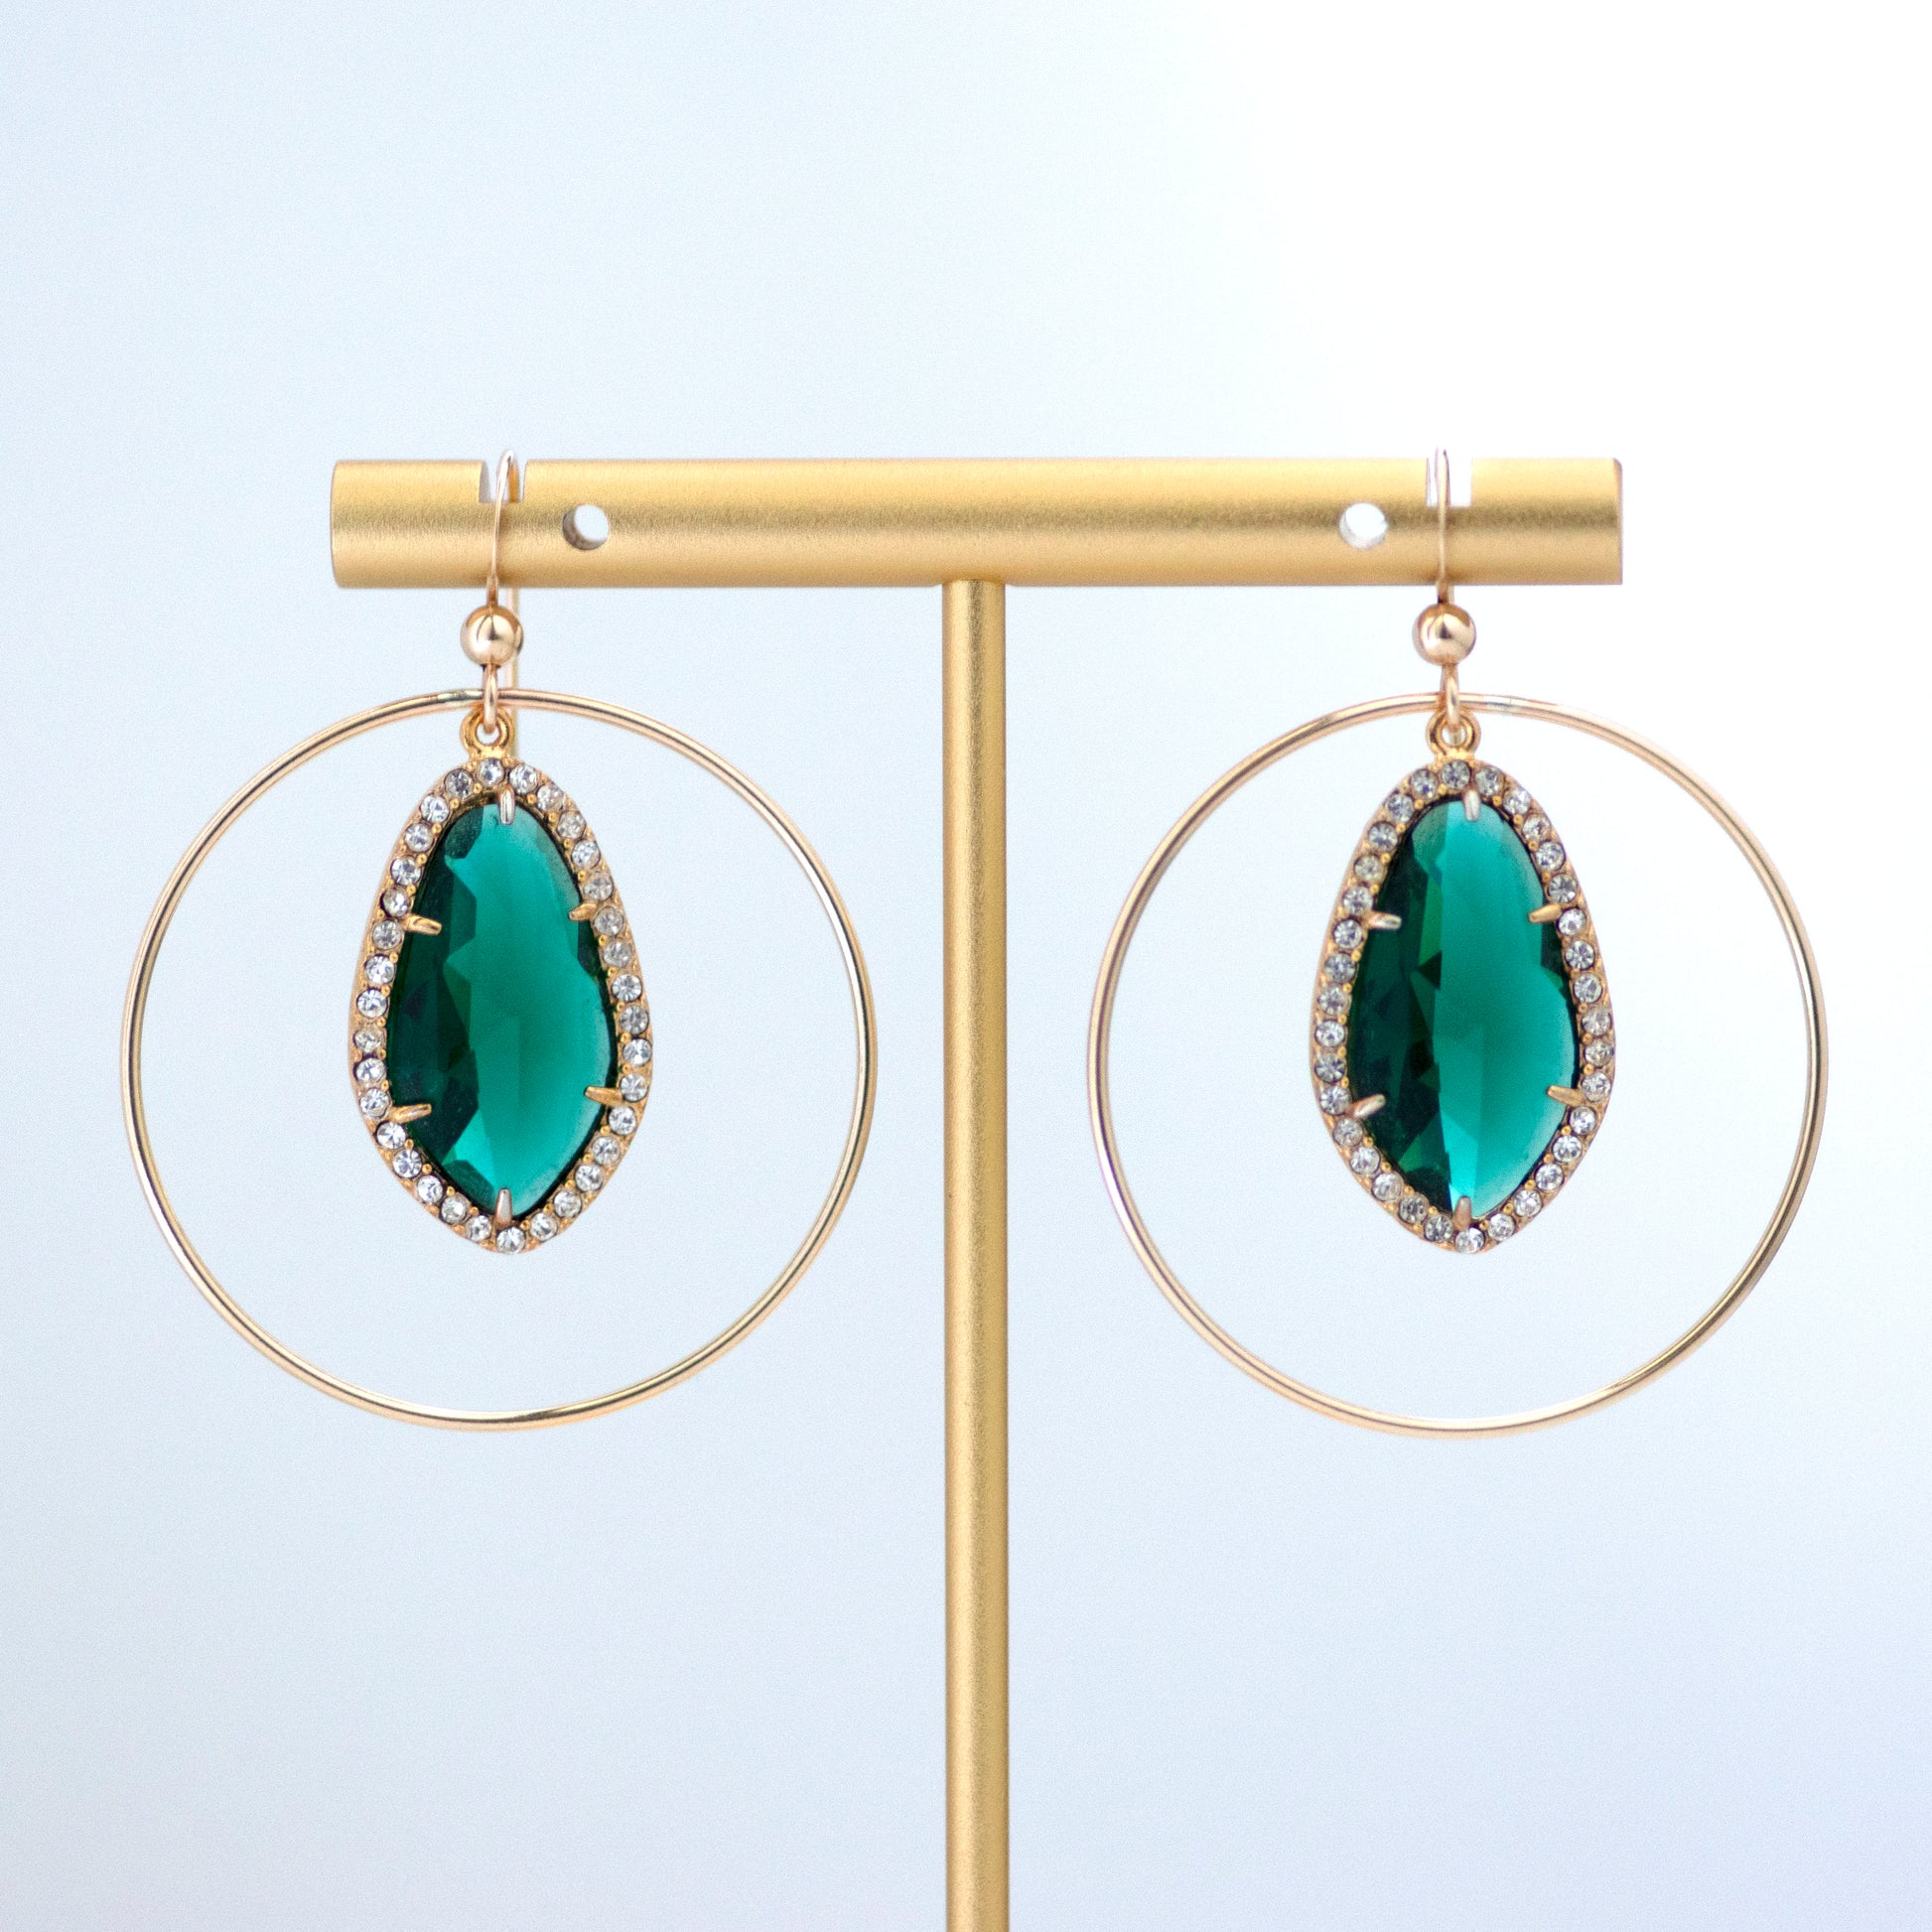 These upcycled vintage earrings are made up of:  Gold tone vintage emerald green crystal rhinestone drops and 14k gold fill. Earrings are hanging on a gold tone T bar earrings stand.